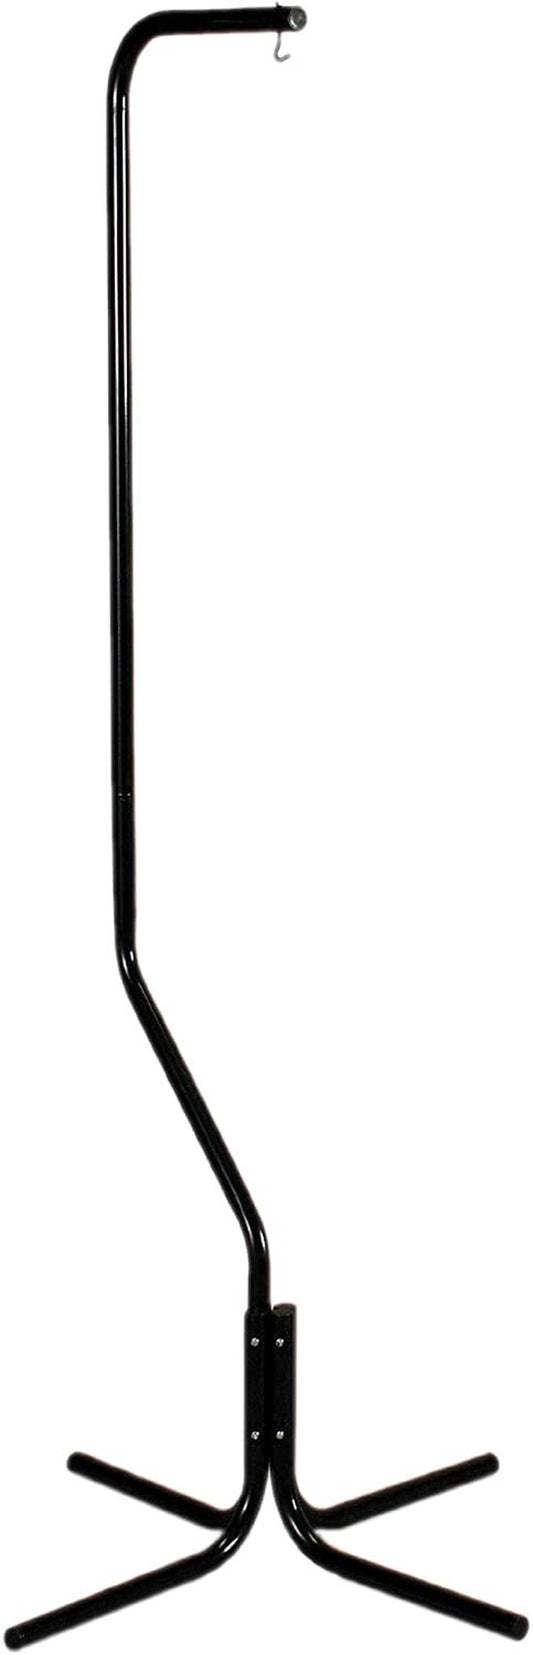 Prevue Pet Products Tubular Steel Hanging Bird Cage Stand 1780 Black, 24-Inch by 24-Inch by 60-Inch Animals & Pet Supplies > Pet Supplies > Bird Supplies > Bird Cages & Stands Prevue Pet Products   